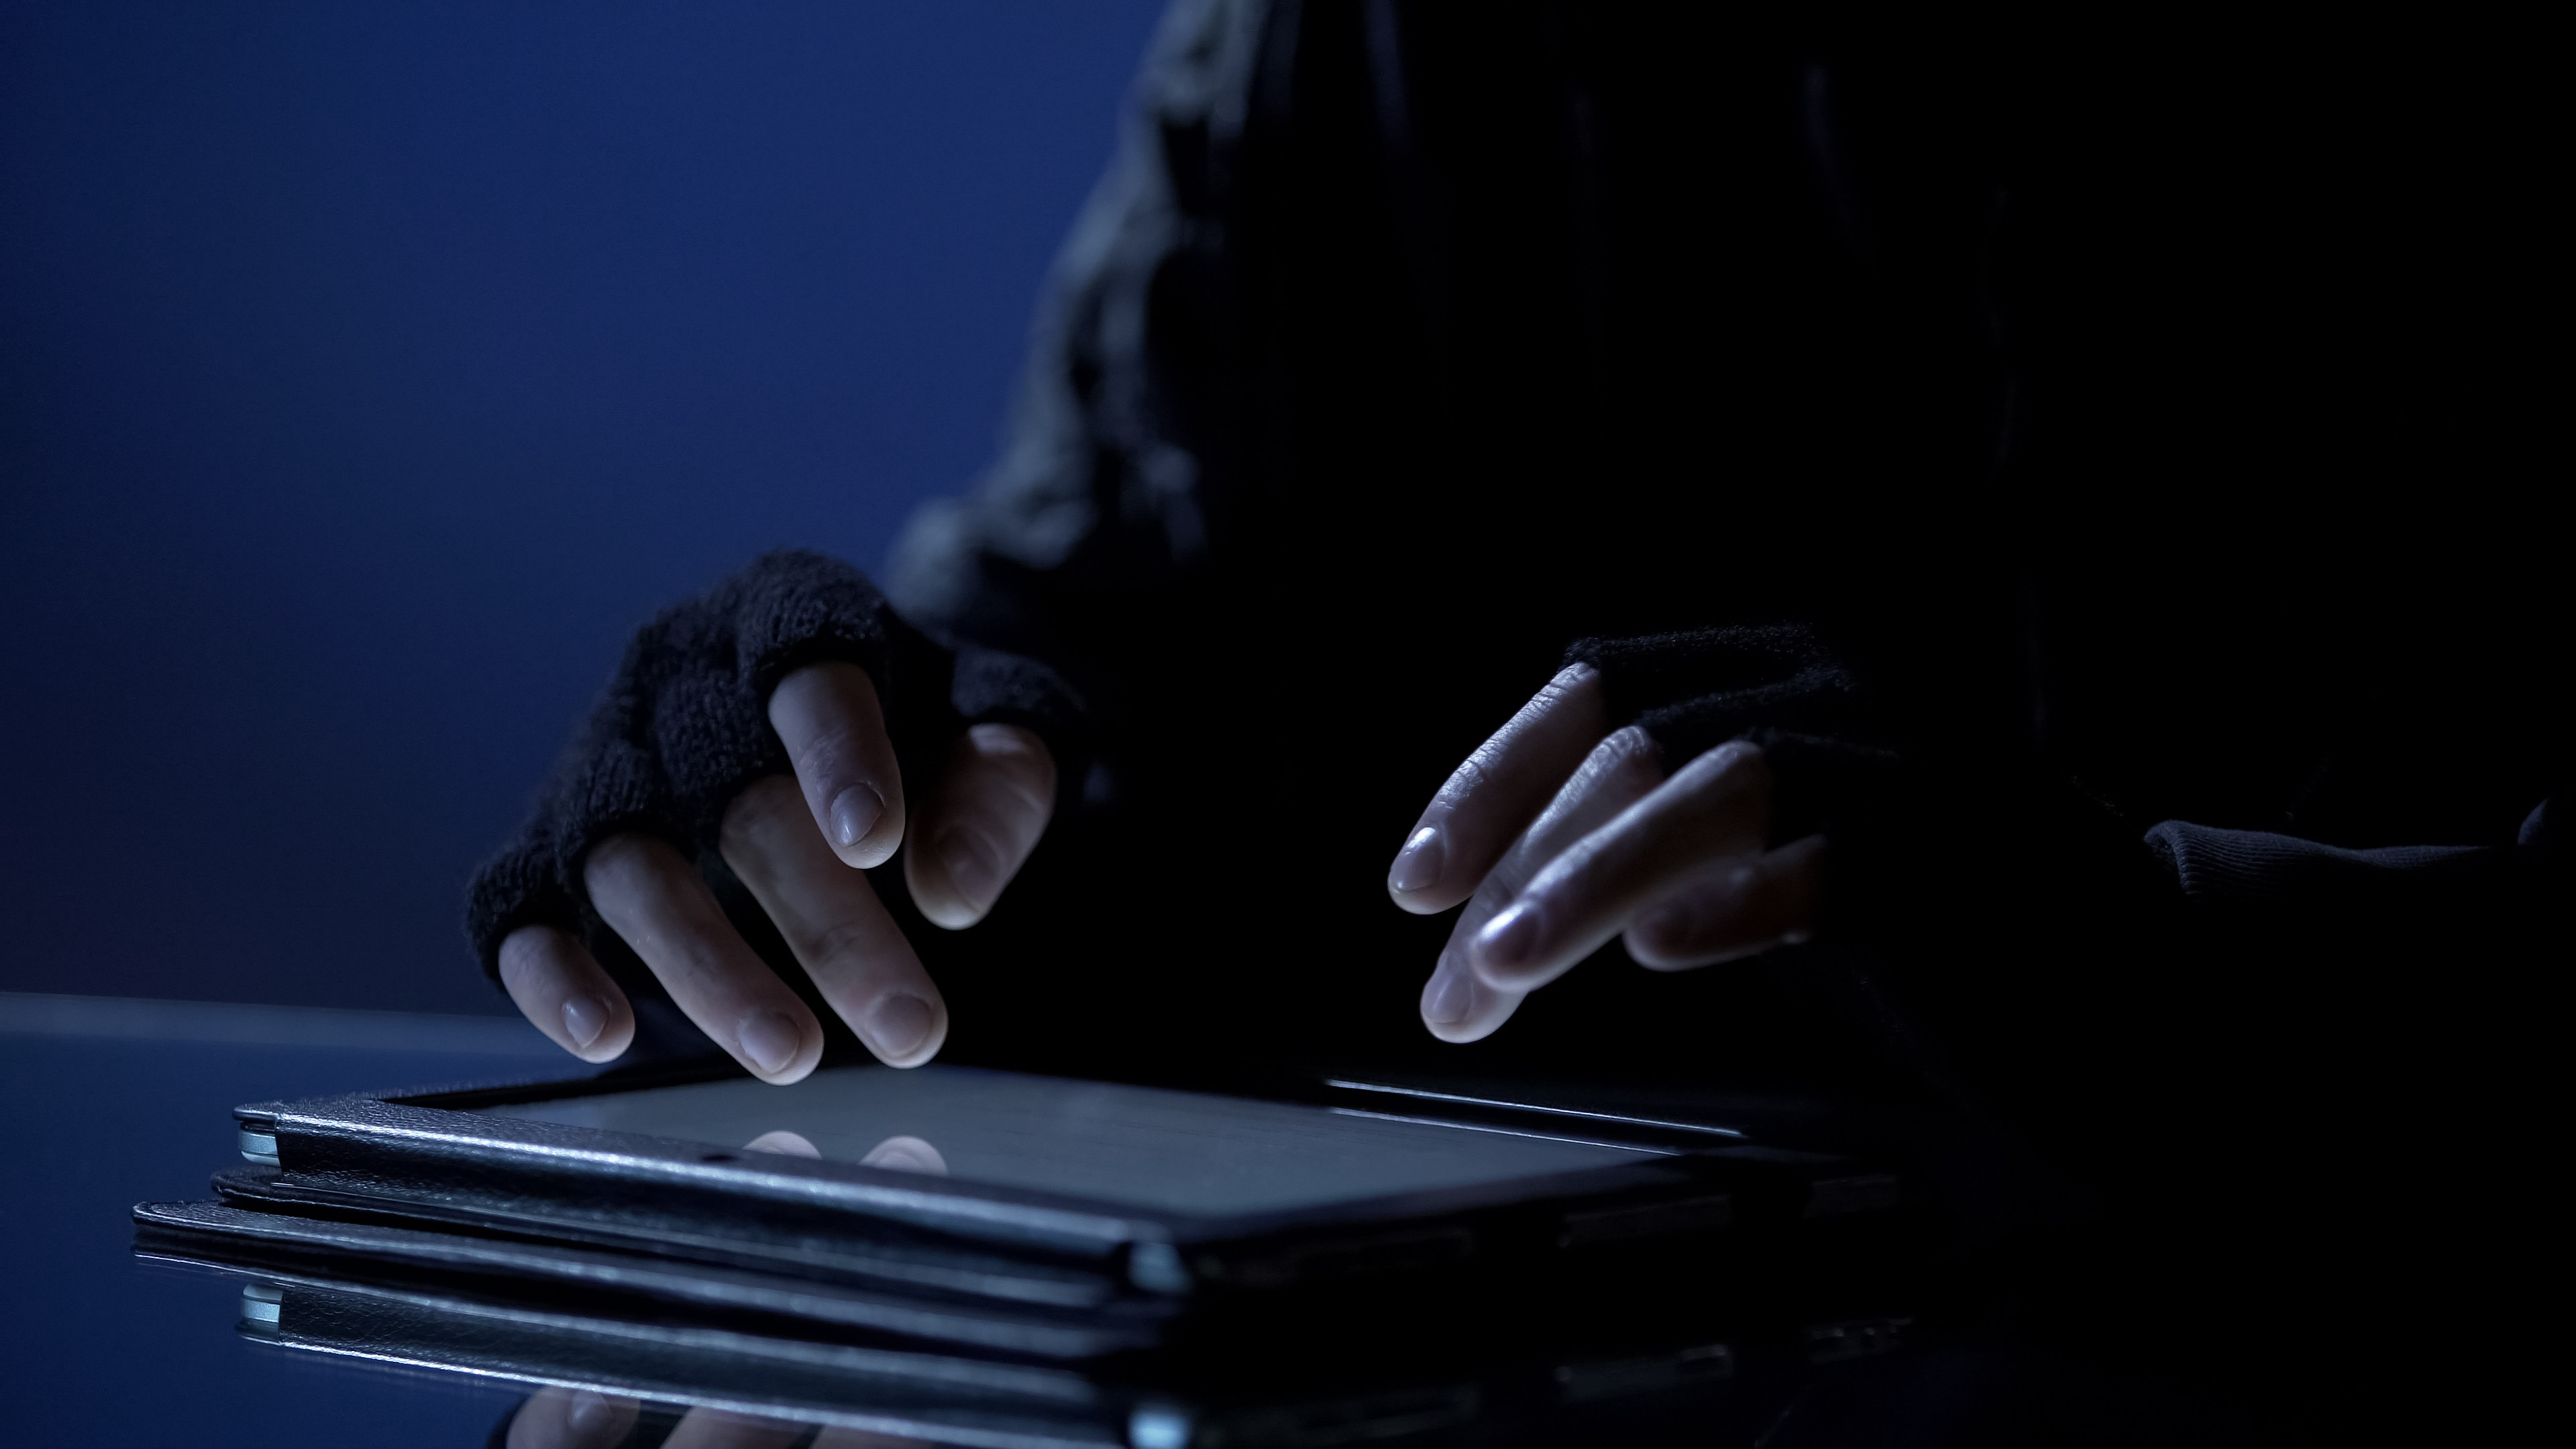 Man illegally viewing confidential files on a tablet. Photo: Shutterstock 